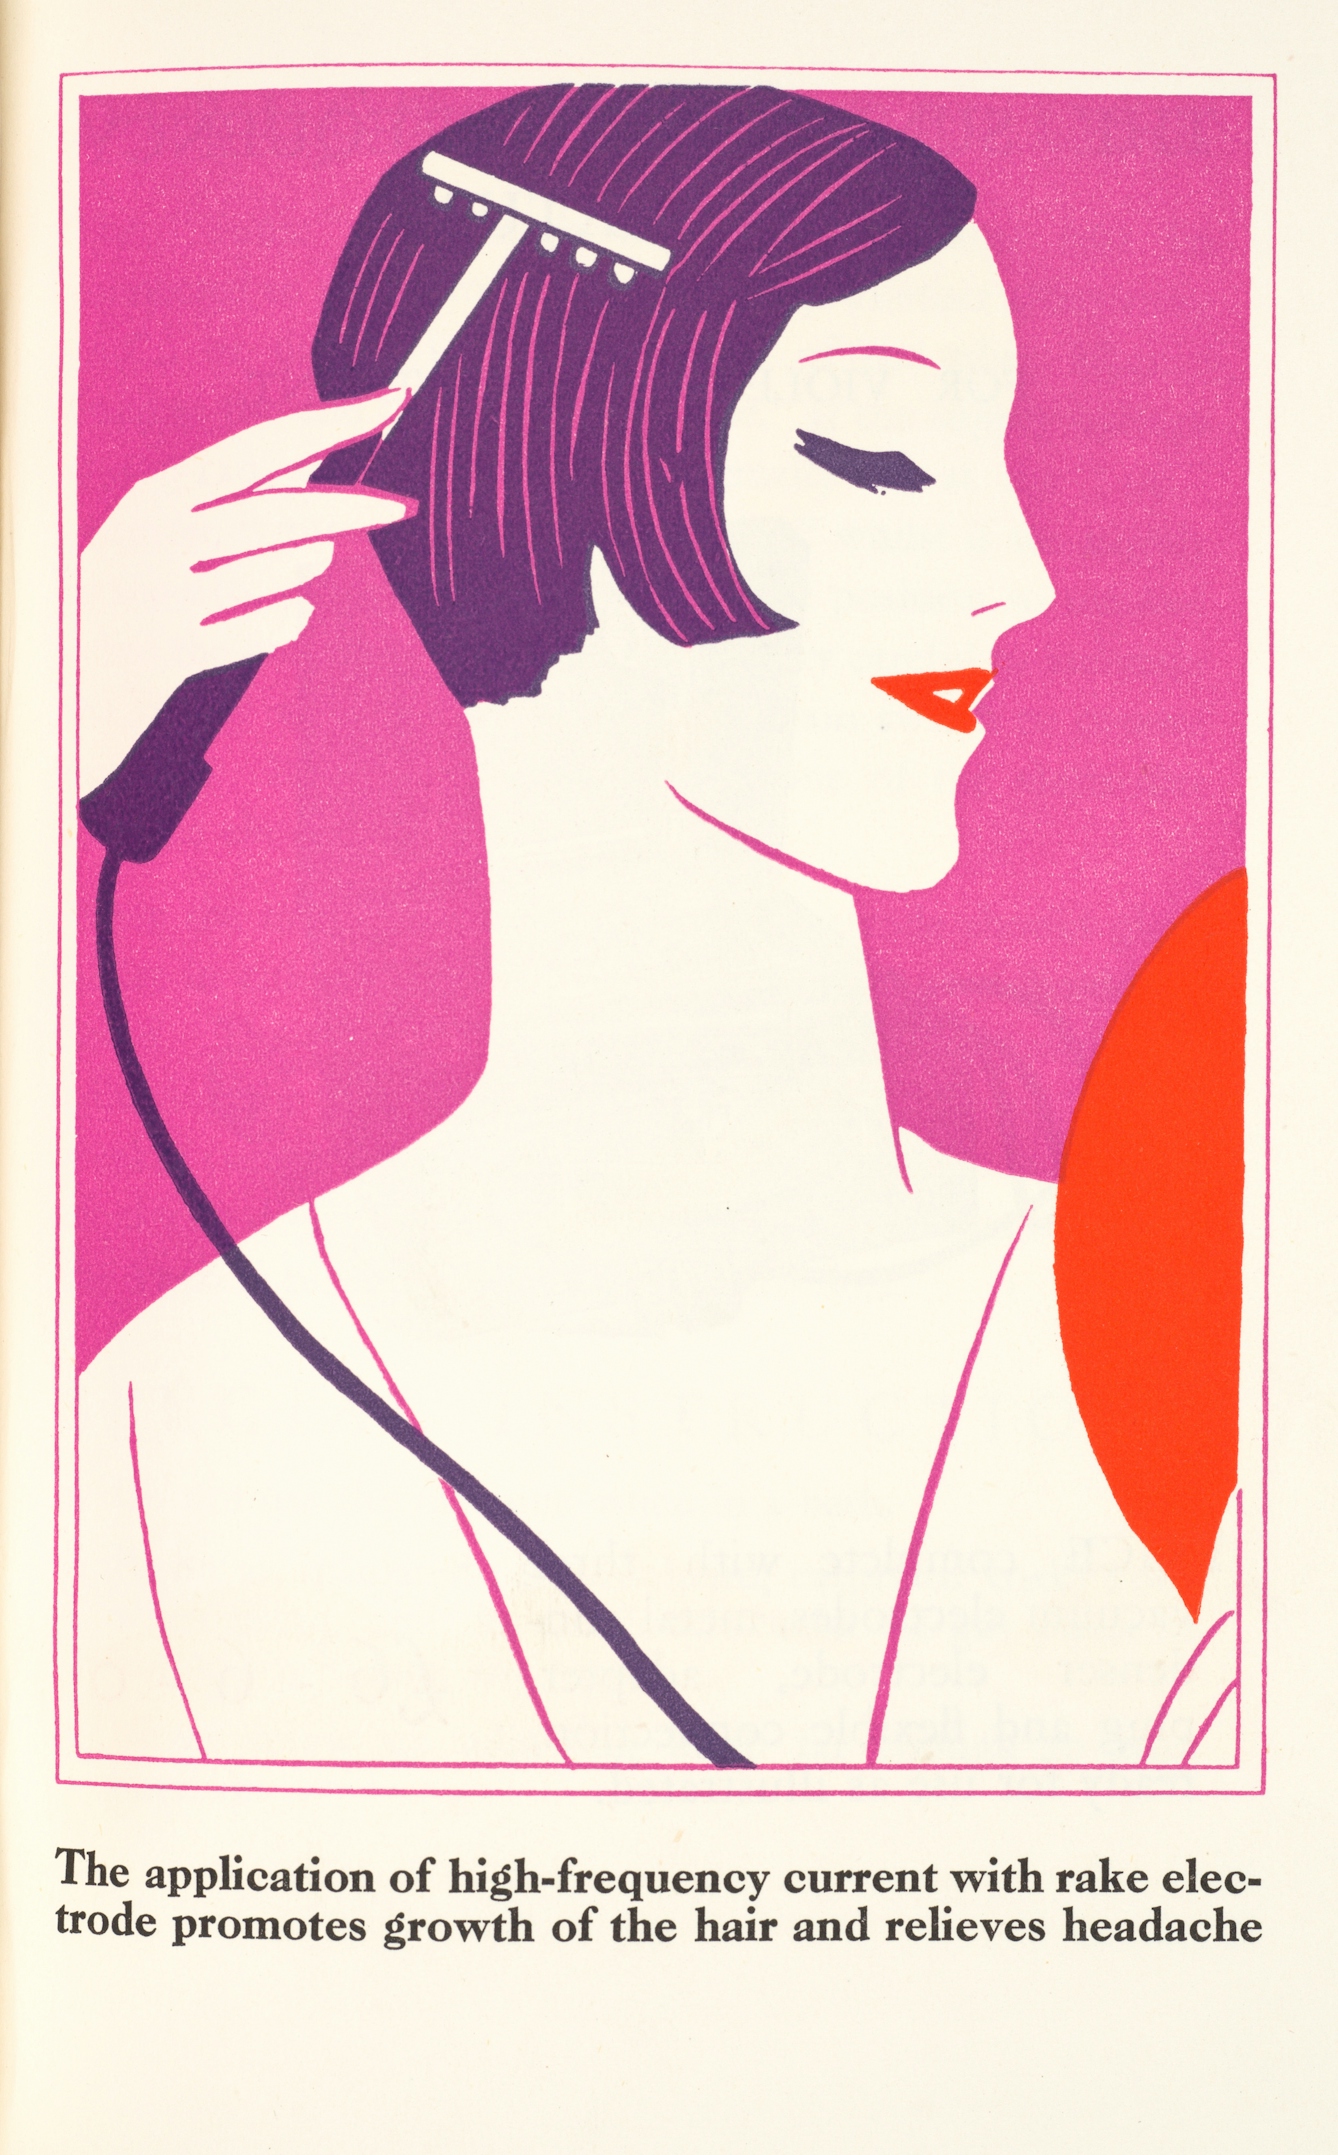 Photograph of a page from an illustrated booklet. The illustration in red, purple and violet shows the head and shoulders of a woman holding a wired handheld device against her scalp. The image is captioned, 'The application of high-frequency current with rake electrode promotes growth of the hair and relieves headache.'